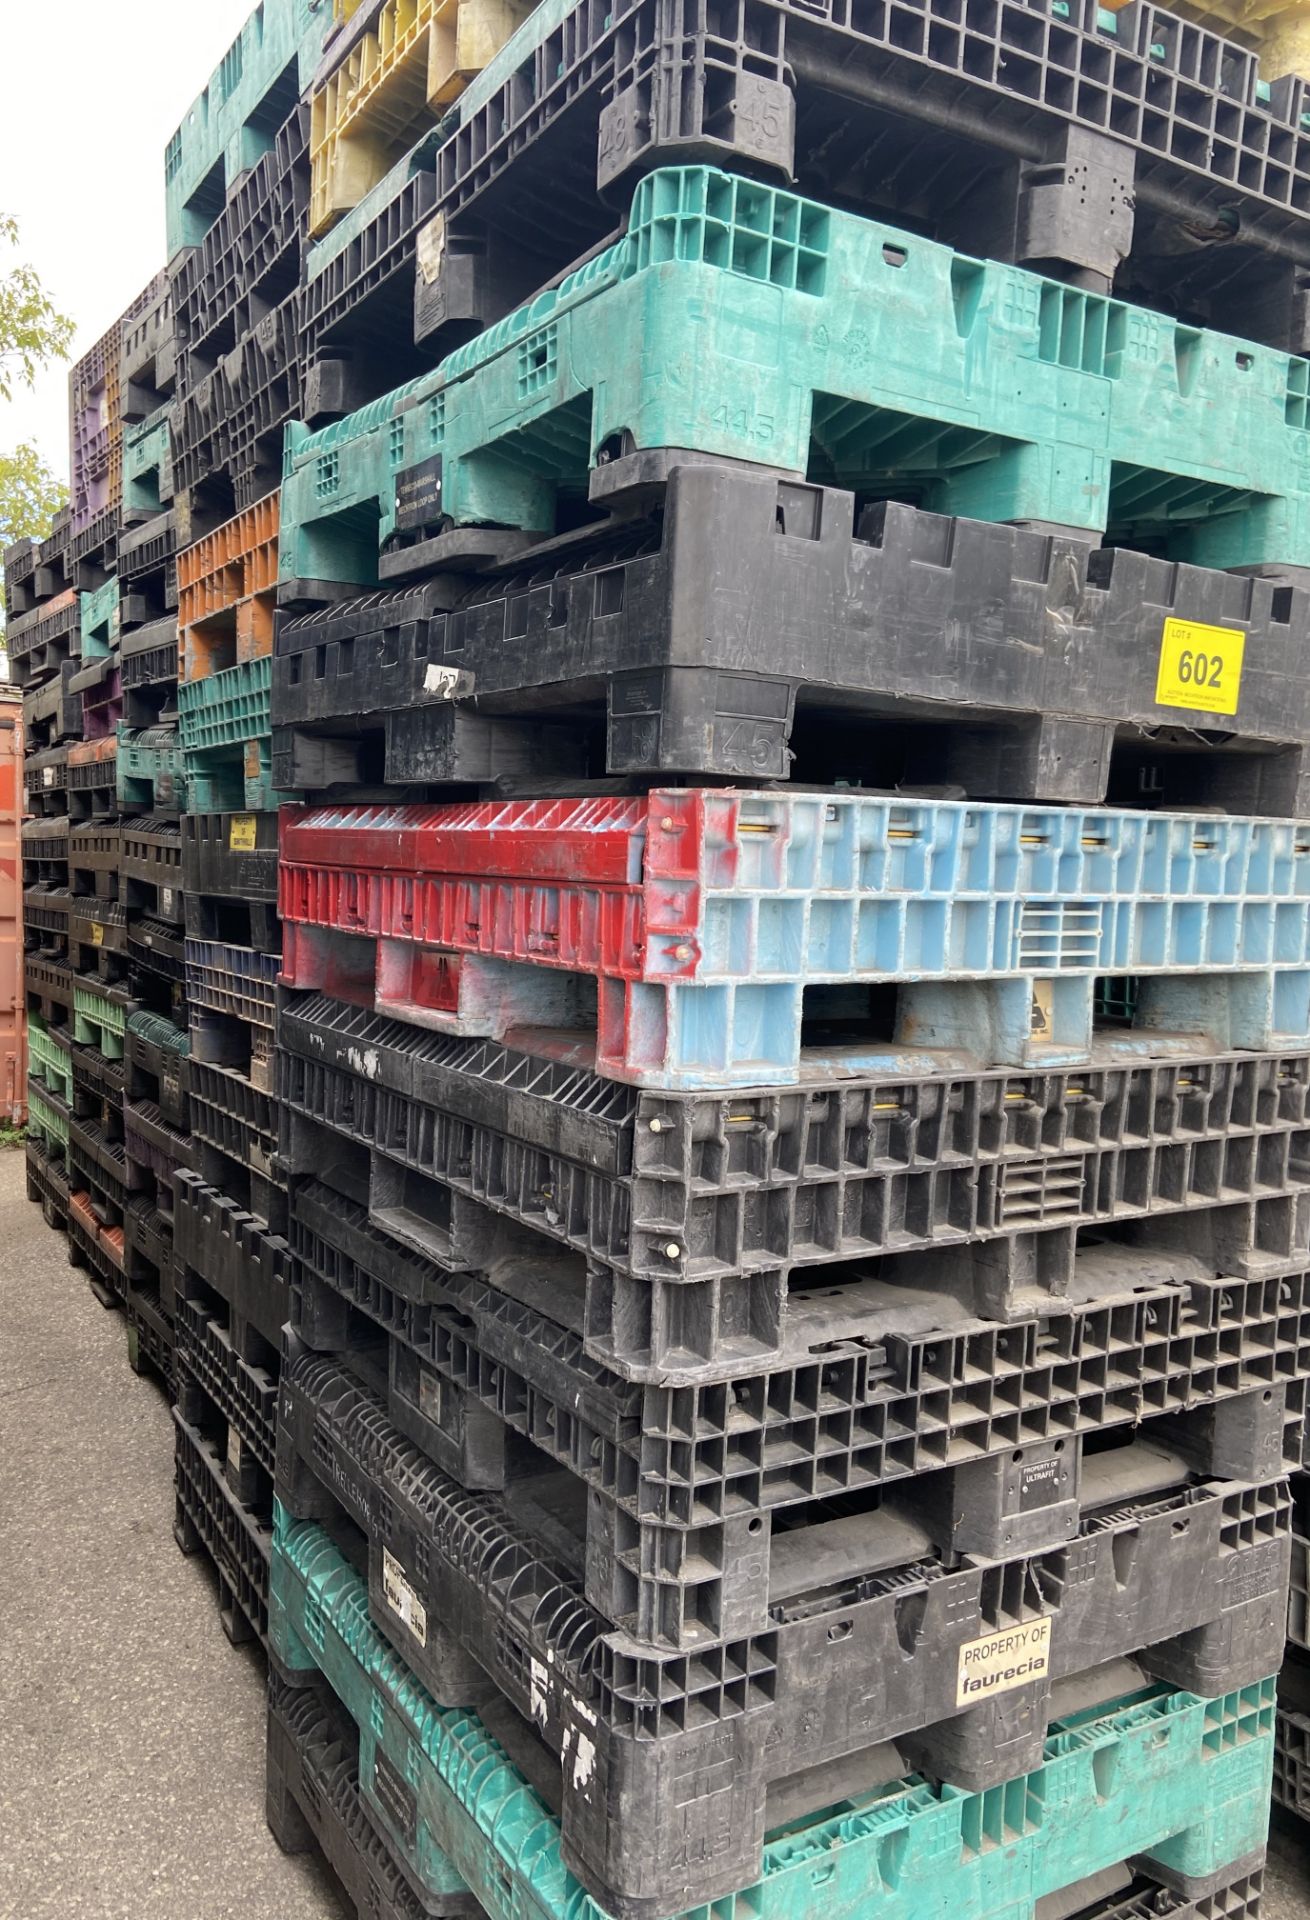 LOT OF (100) 42" X 48" FOLDING PLASTIC BINS (NOTE: SOME DAMAGED) - Image 6 of 6